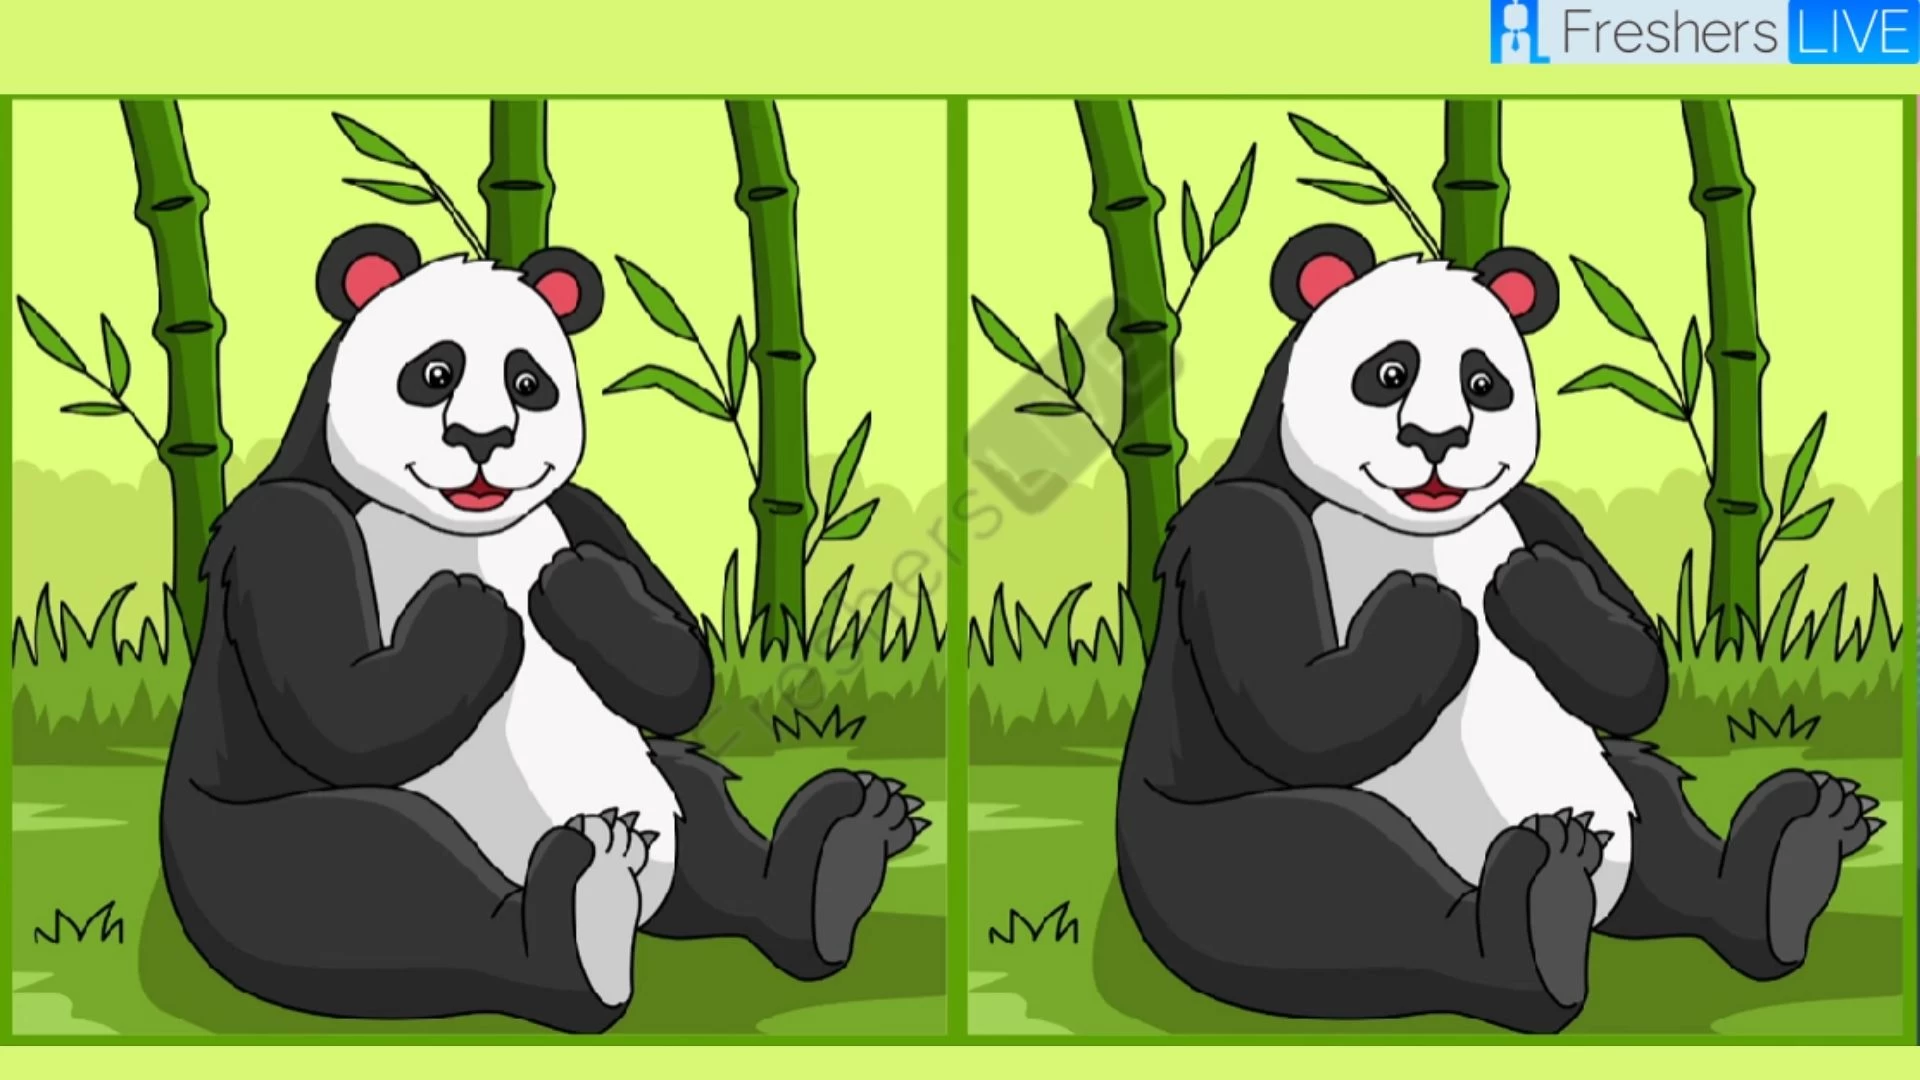 Only Extra Sharp Eyes can spot the 3 differences in the Panda image within 12 seconds